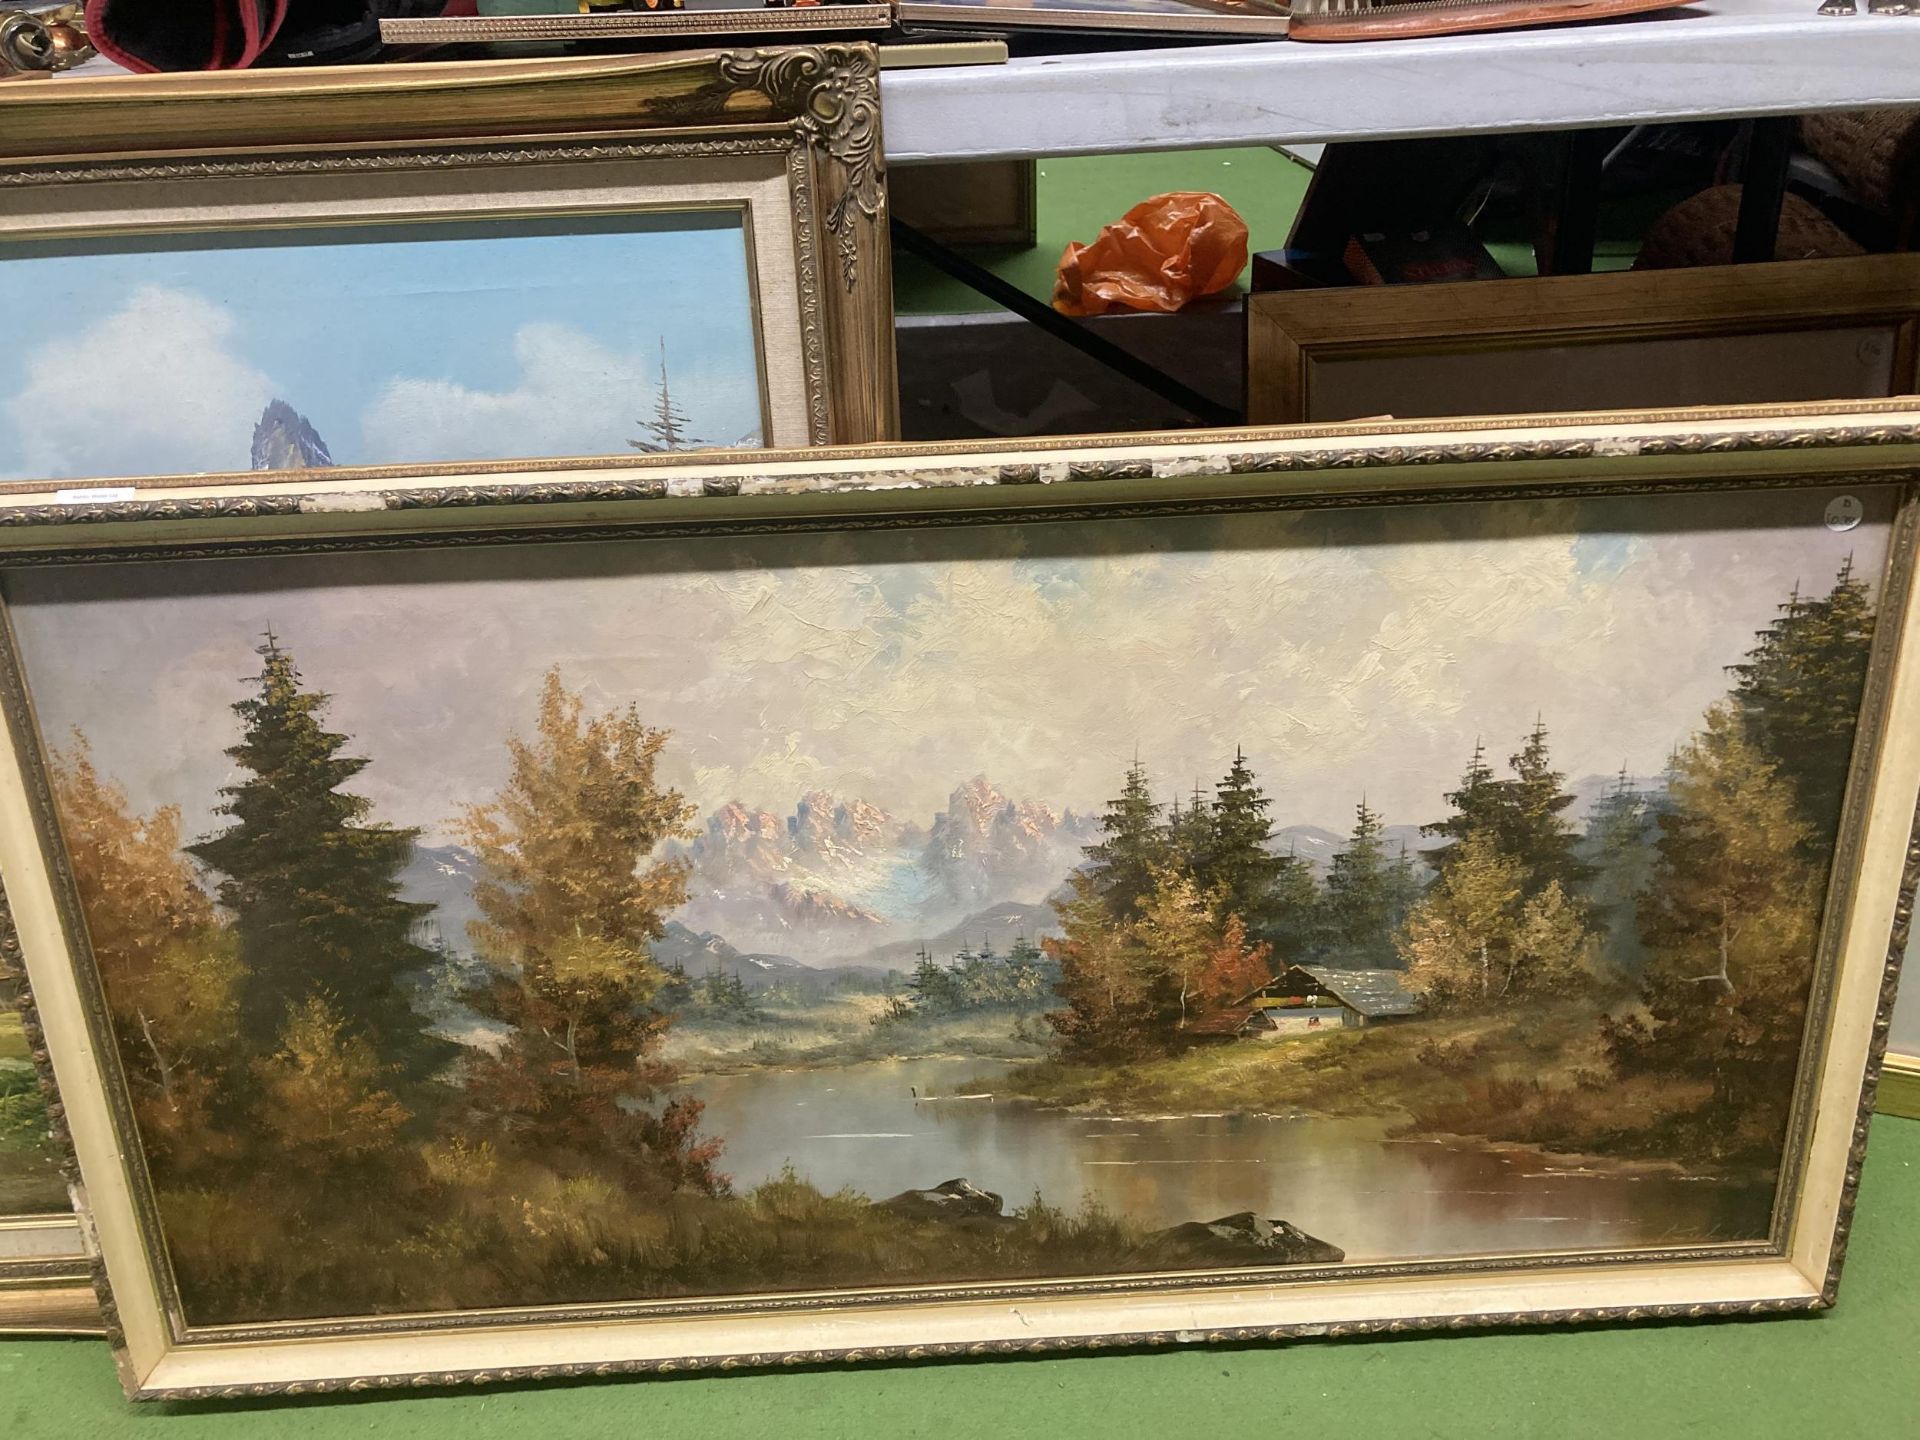 TWO LARGE FRAMED OIL ON CANVAS MOUNTAIN SCENES - Image 2 of 3